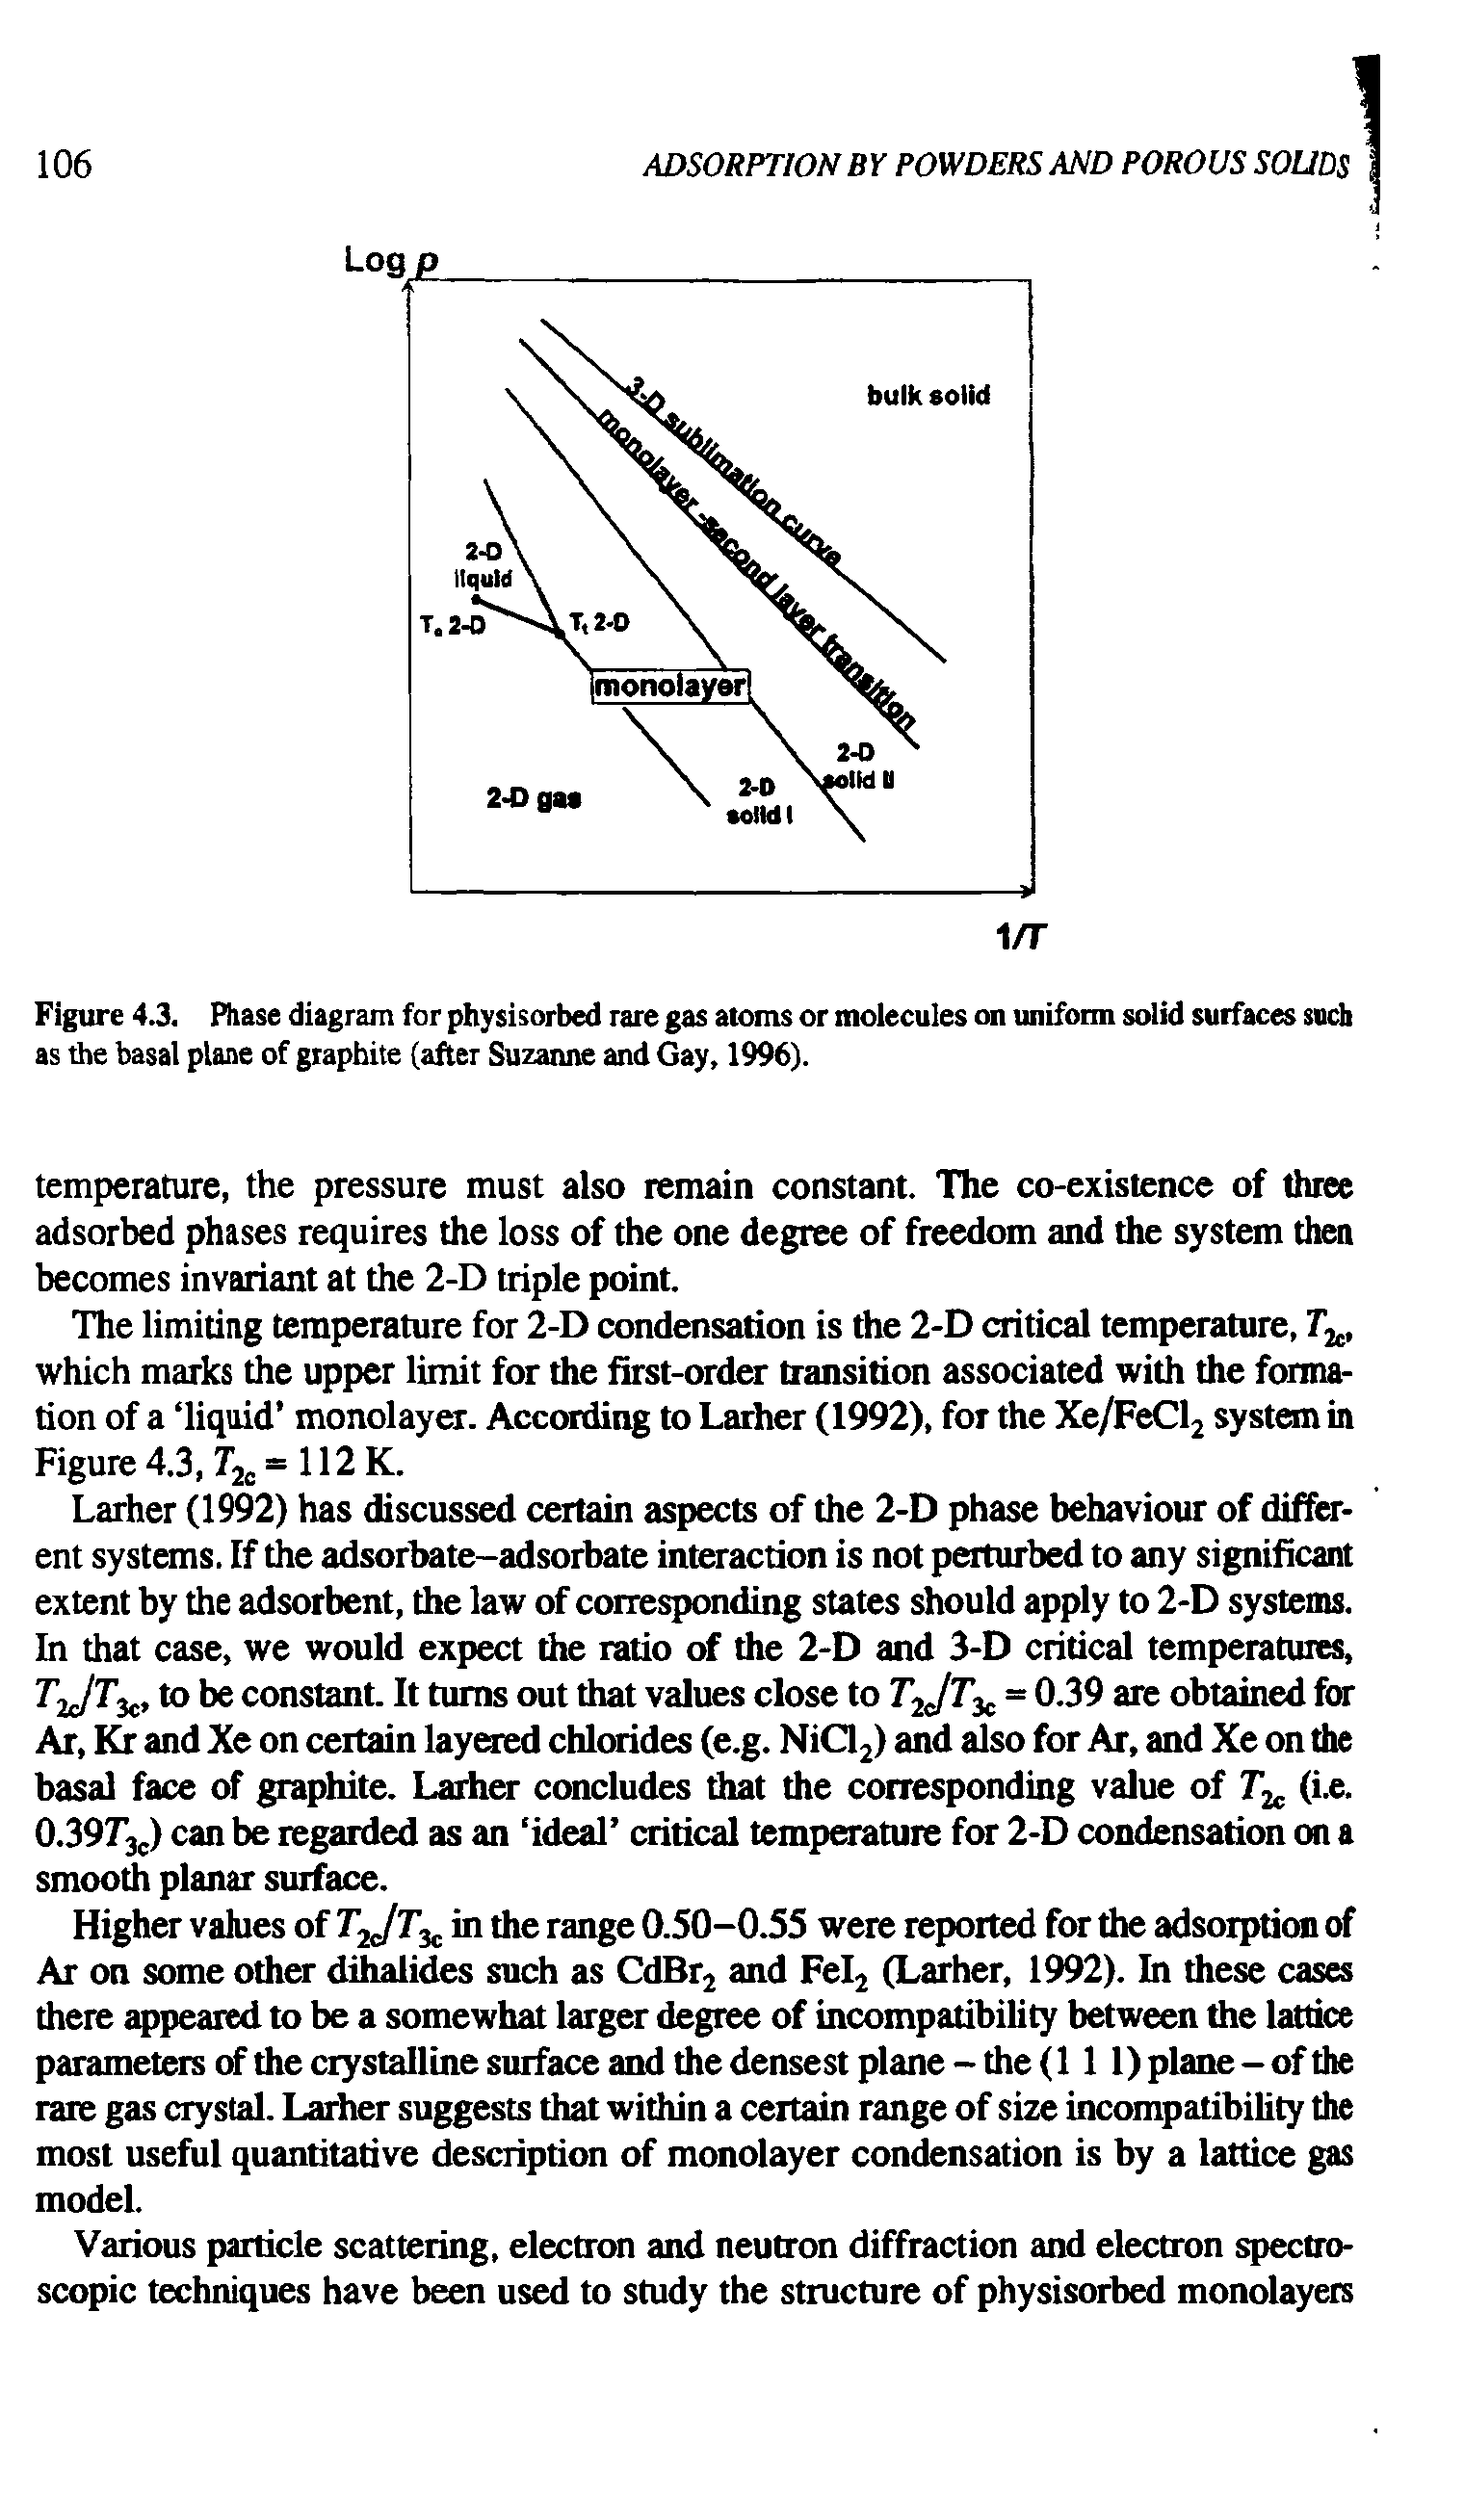 Figure 4.3. Phase diagram for physisorbed rare gas atoms or molecules on uniform solid surfaces such as the basal plane of graphite (after Suzanne and Gay, 1996).